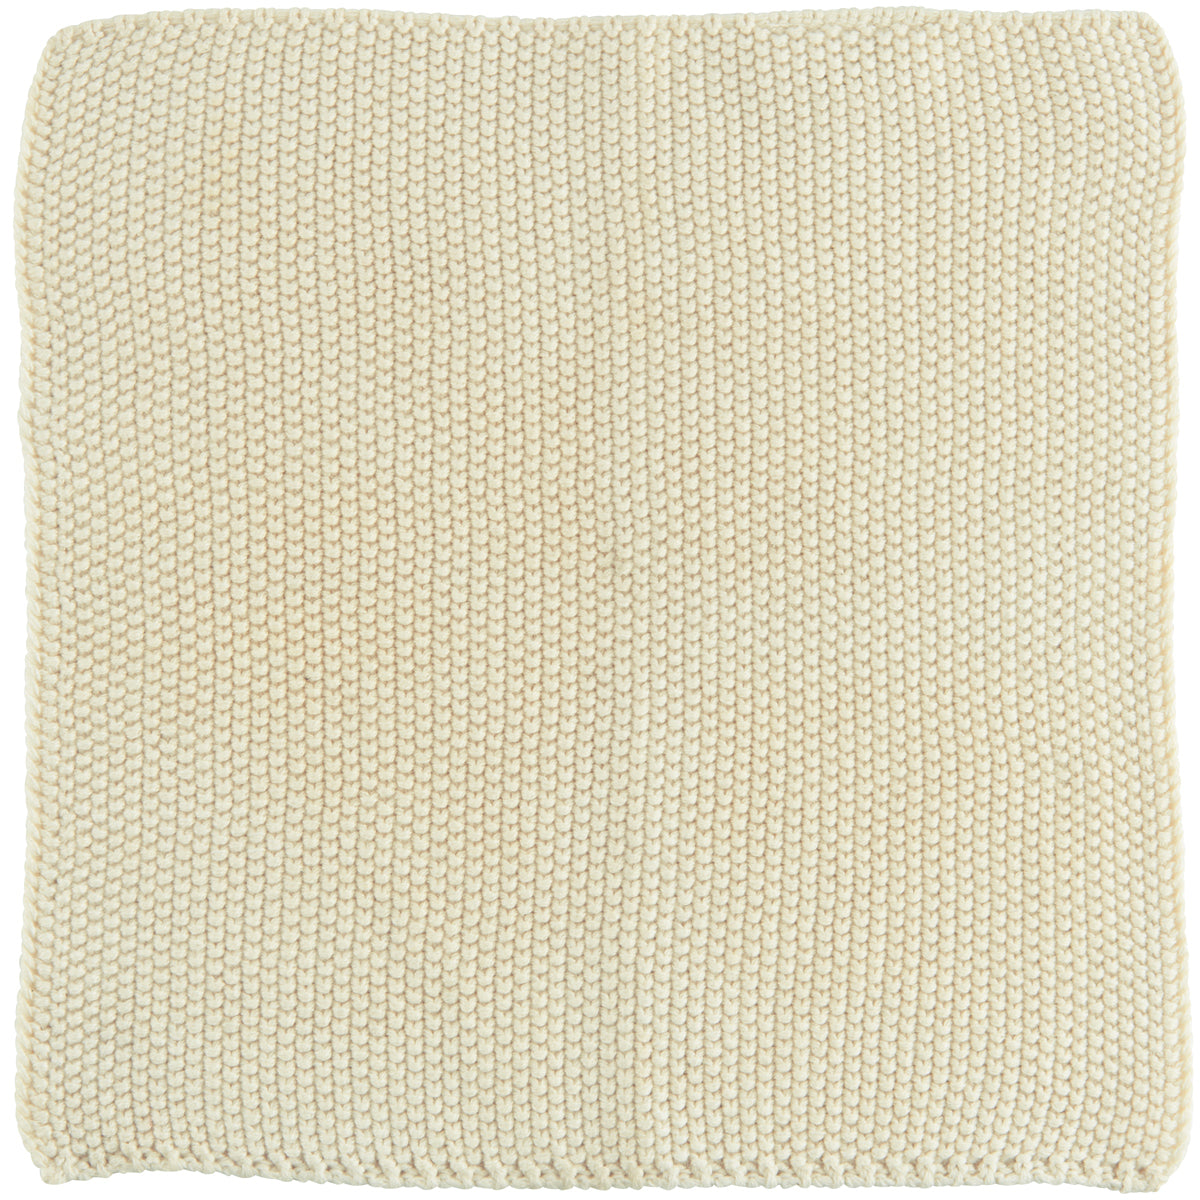 Latte Knitted Cotton Cloth